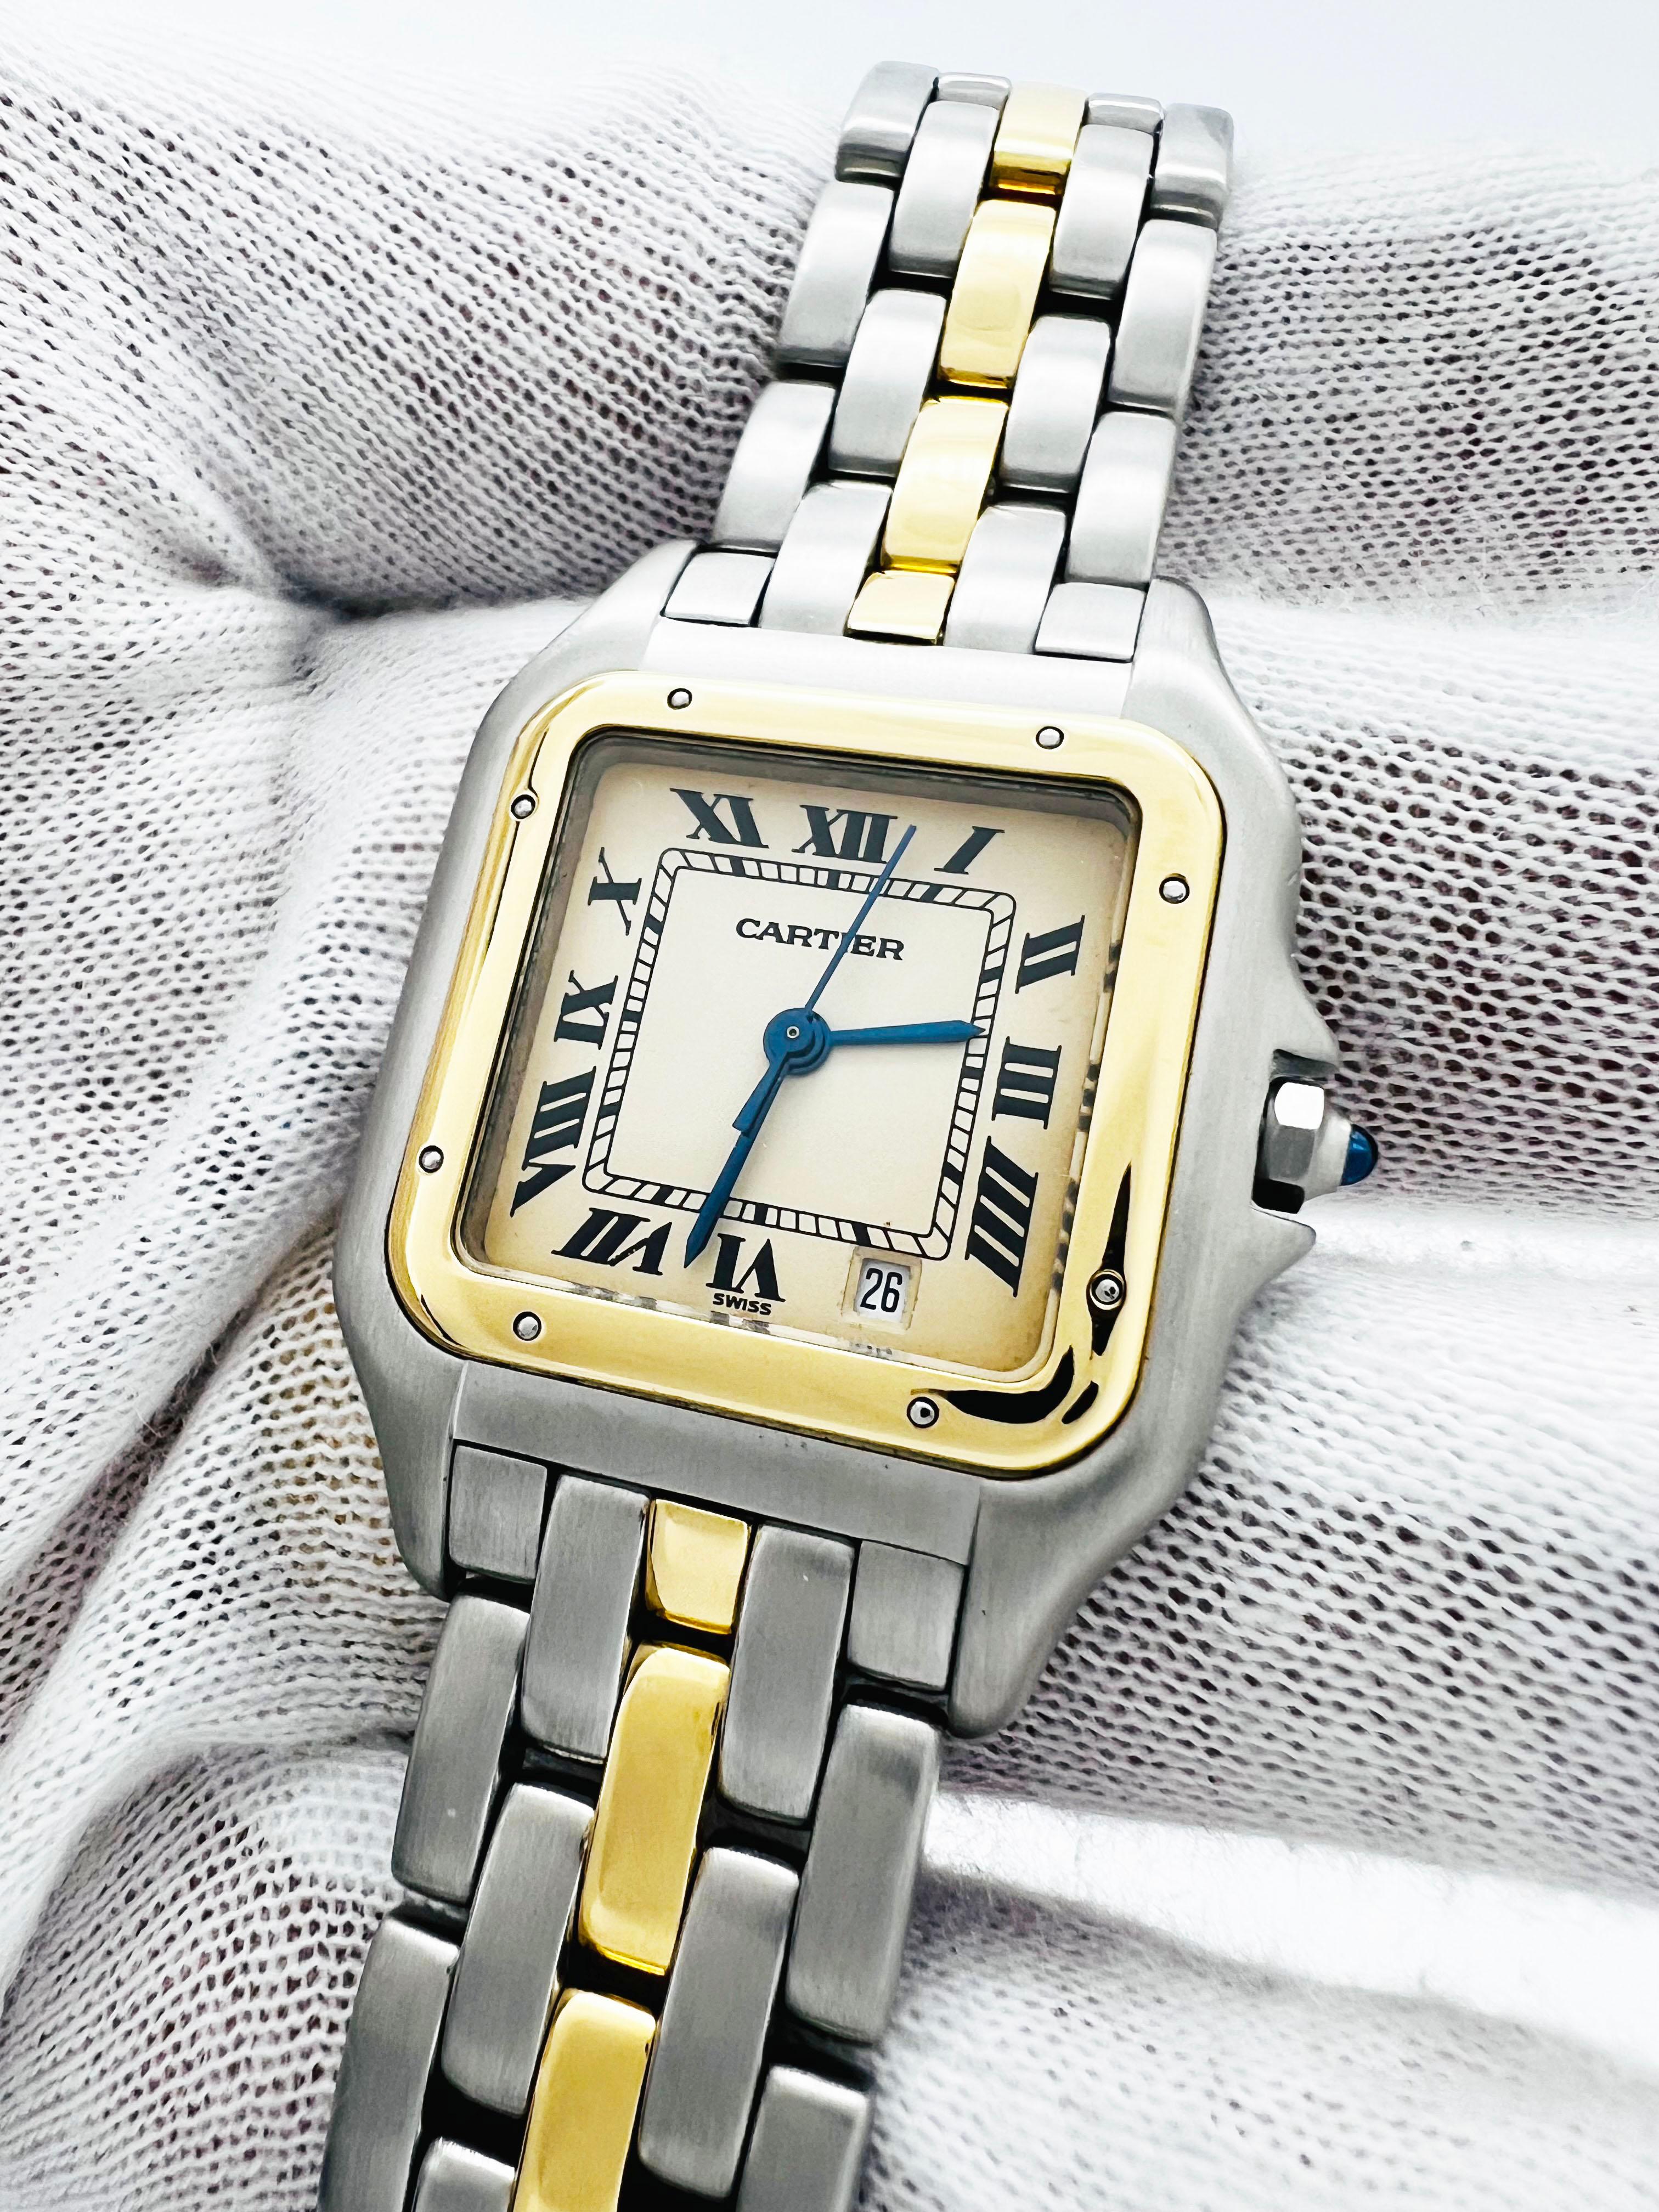 Style Number: 187949

 

Model: Panthere 

 

Case Material: Stainless Steel 

 

Band: 18K Yellow Gold & Stainless Steel 

 

Bezel:  18K Yellow Gold

 

Dial: Ivory / Cream 

 

Face: Sapphire Crystal 

 

Case Size: 27mm 

 

Includes: 

-Elegant